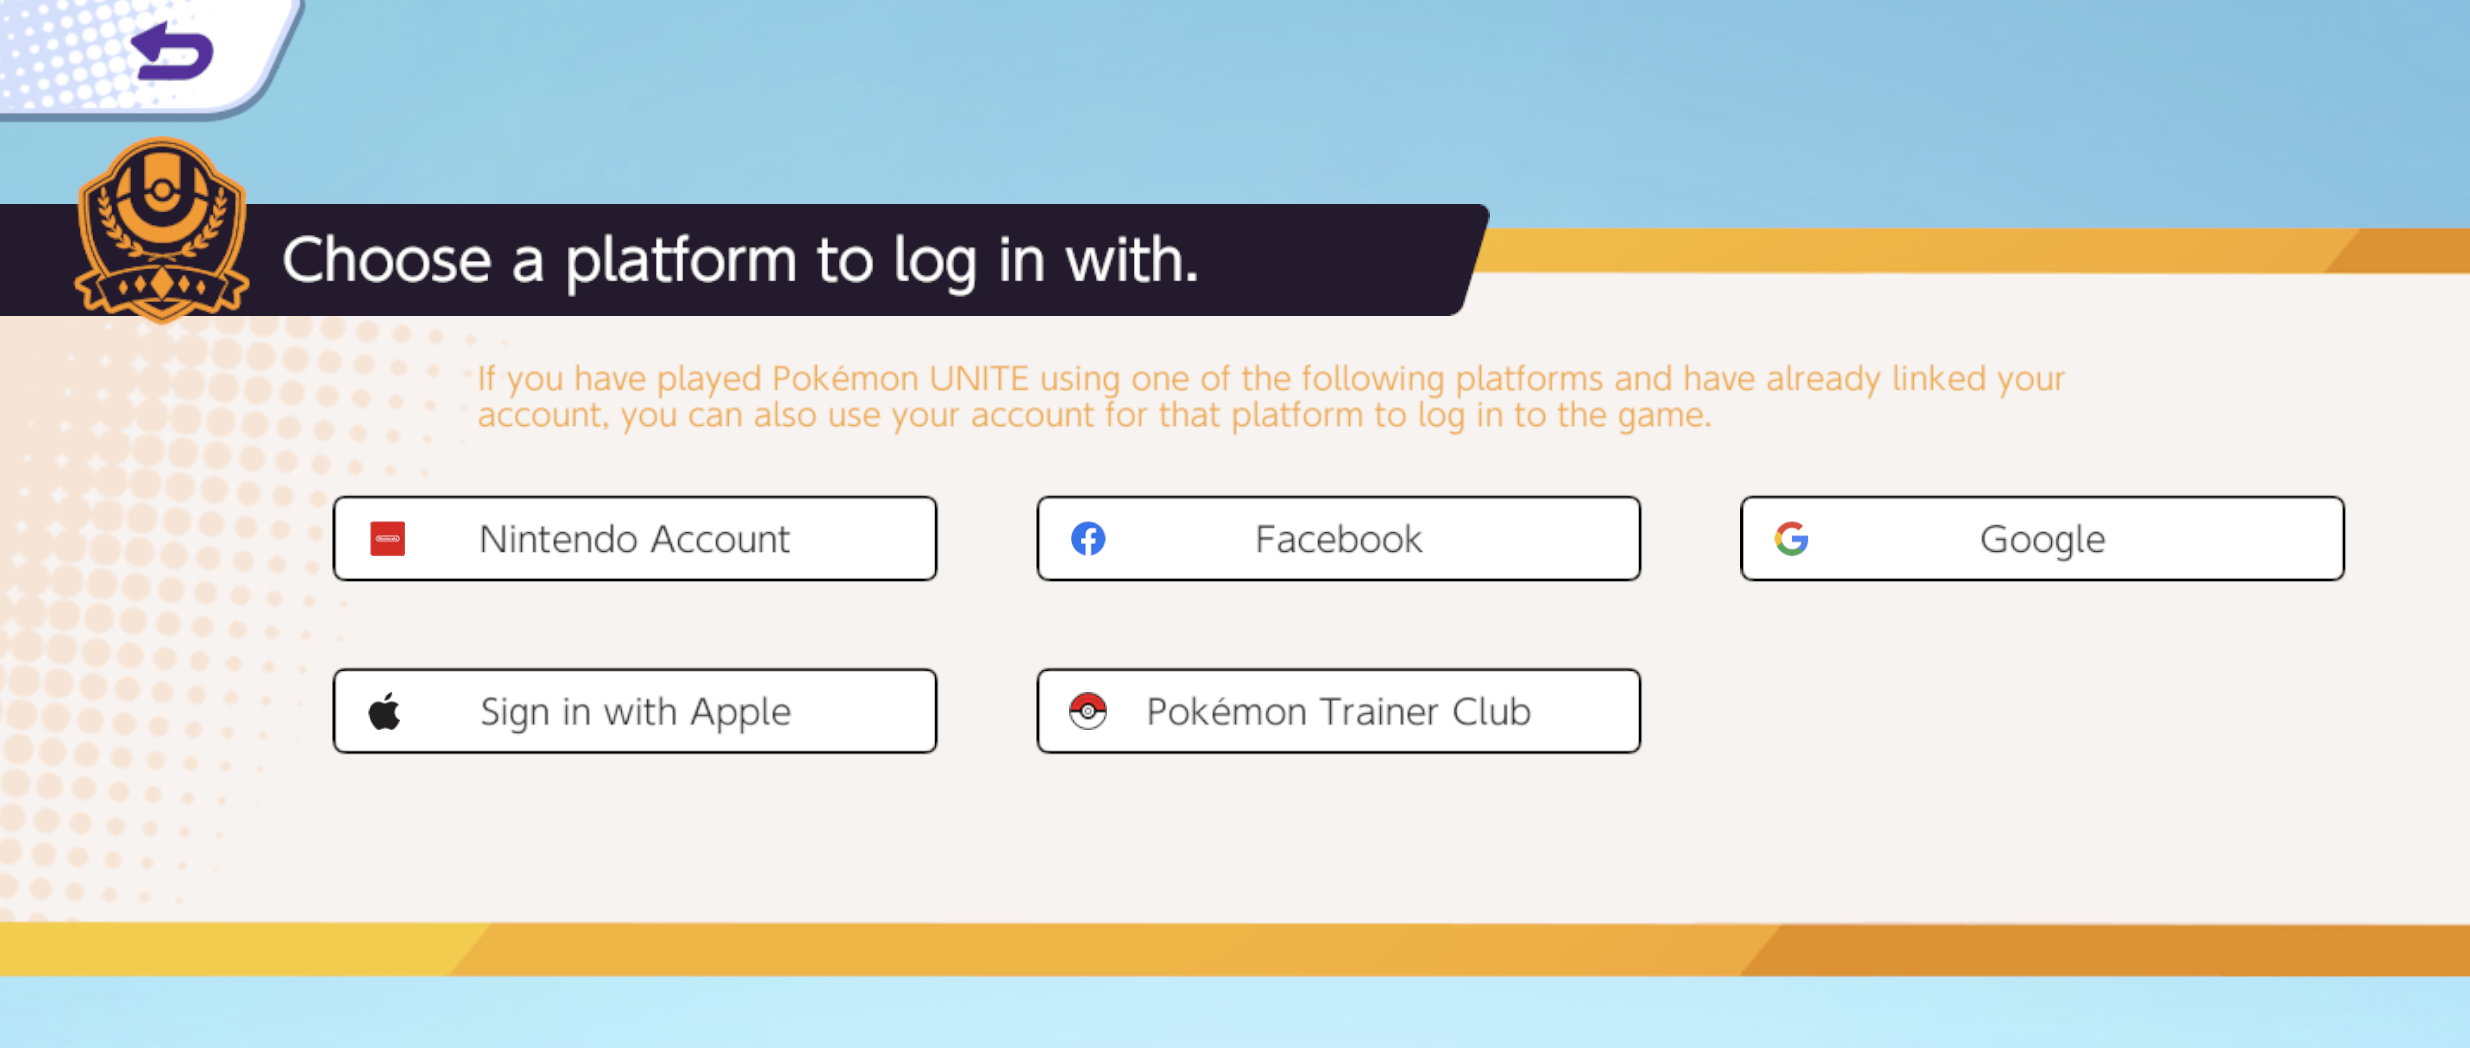 Screenshot shows the 'Choose a platform to log in with.' screen with account login options.